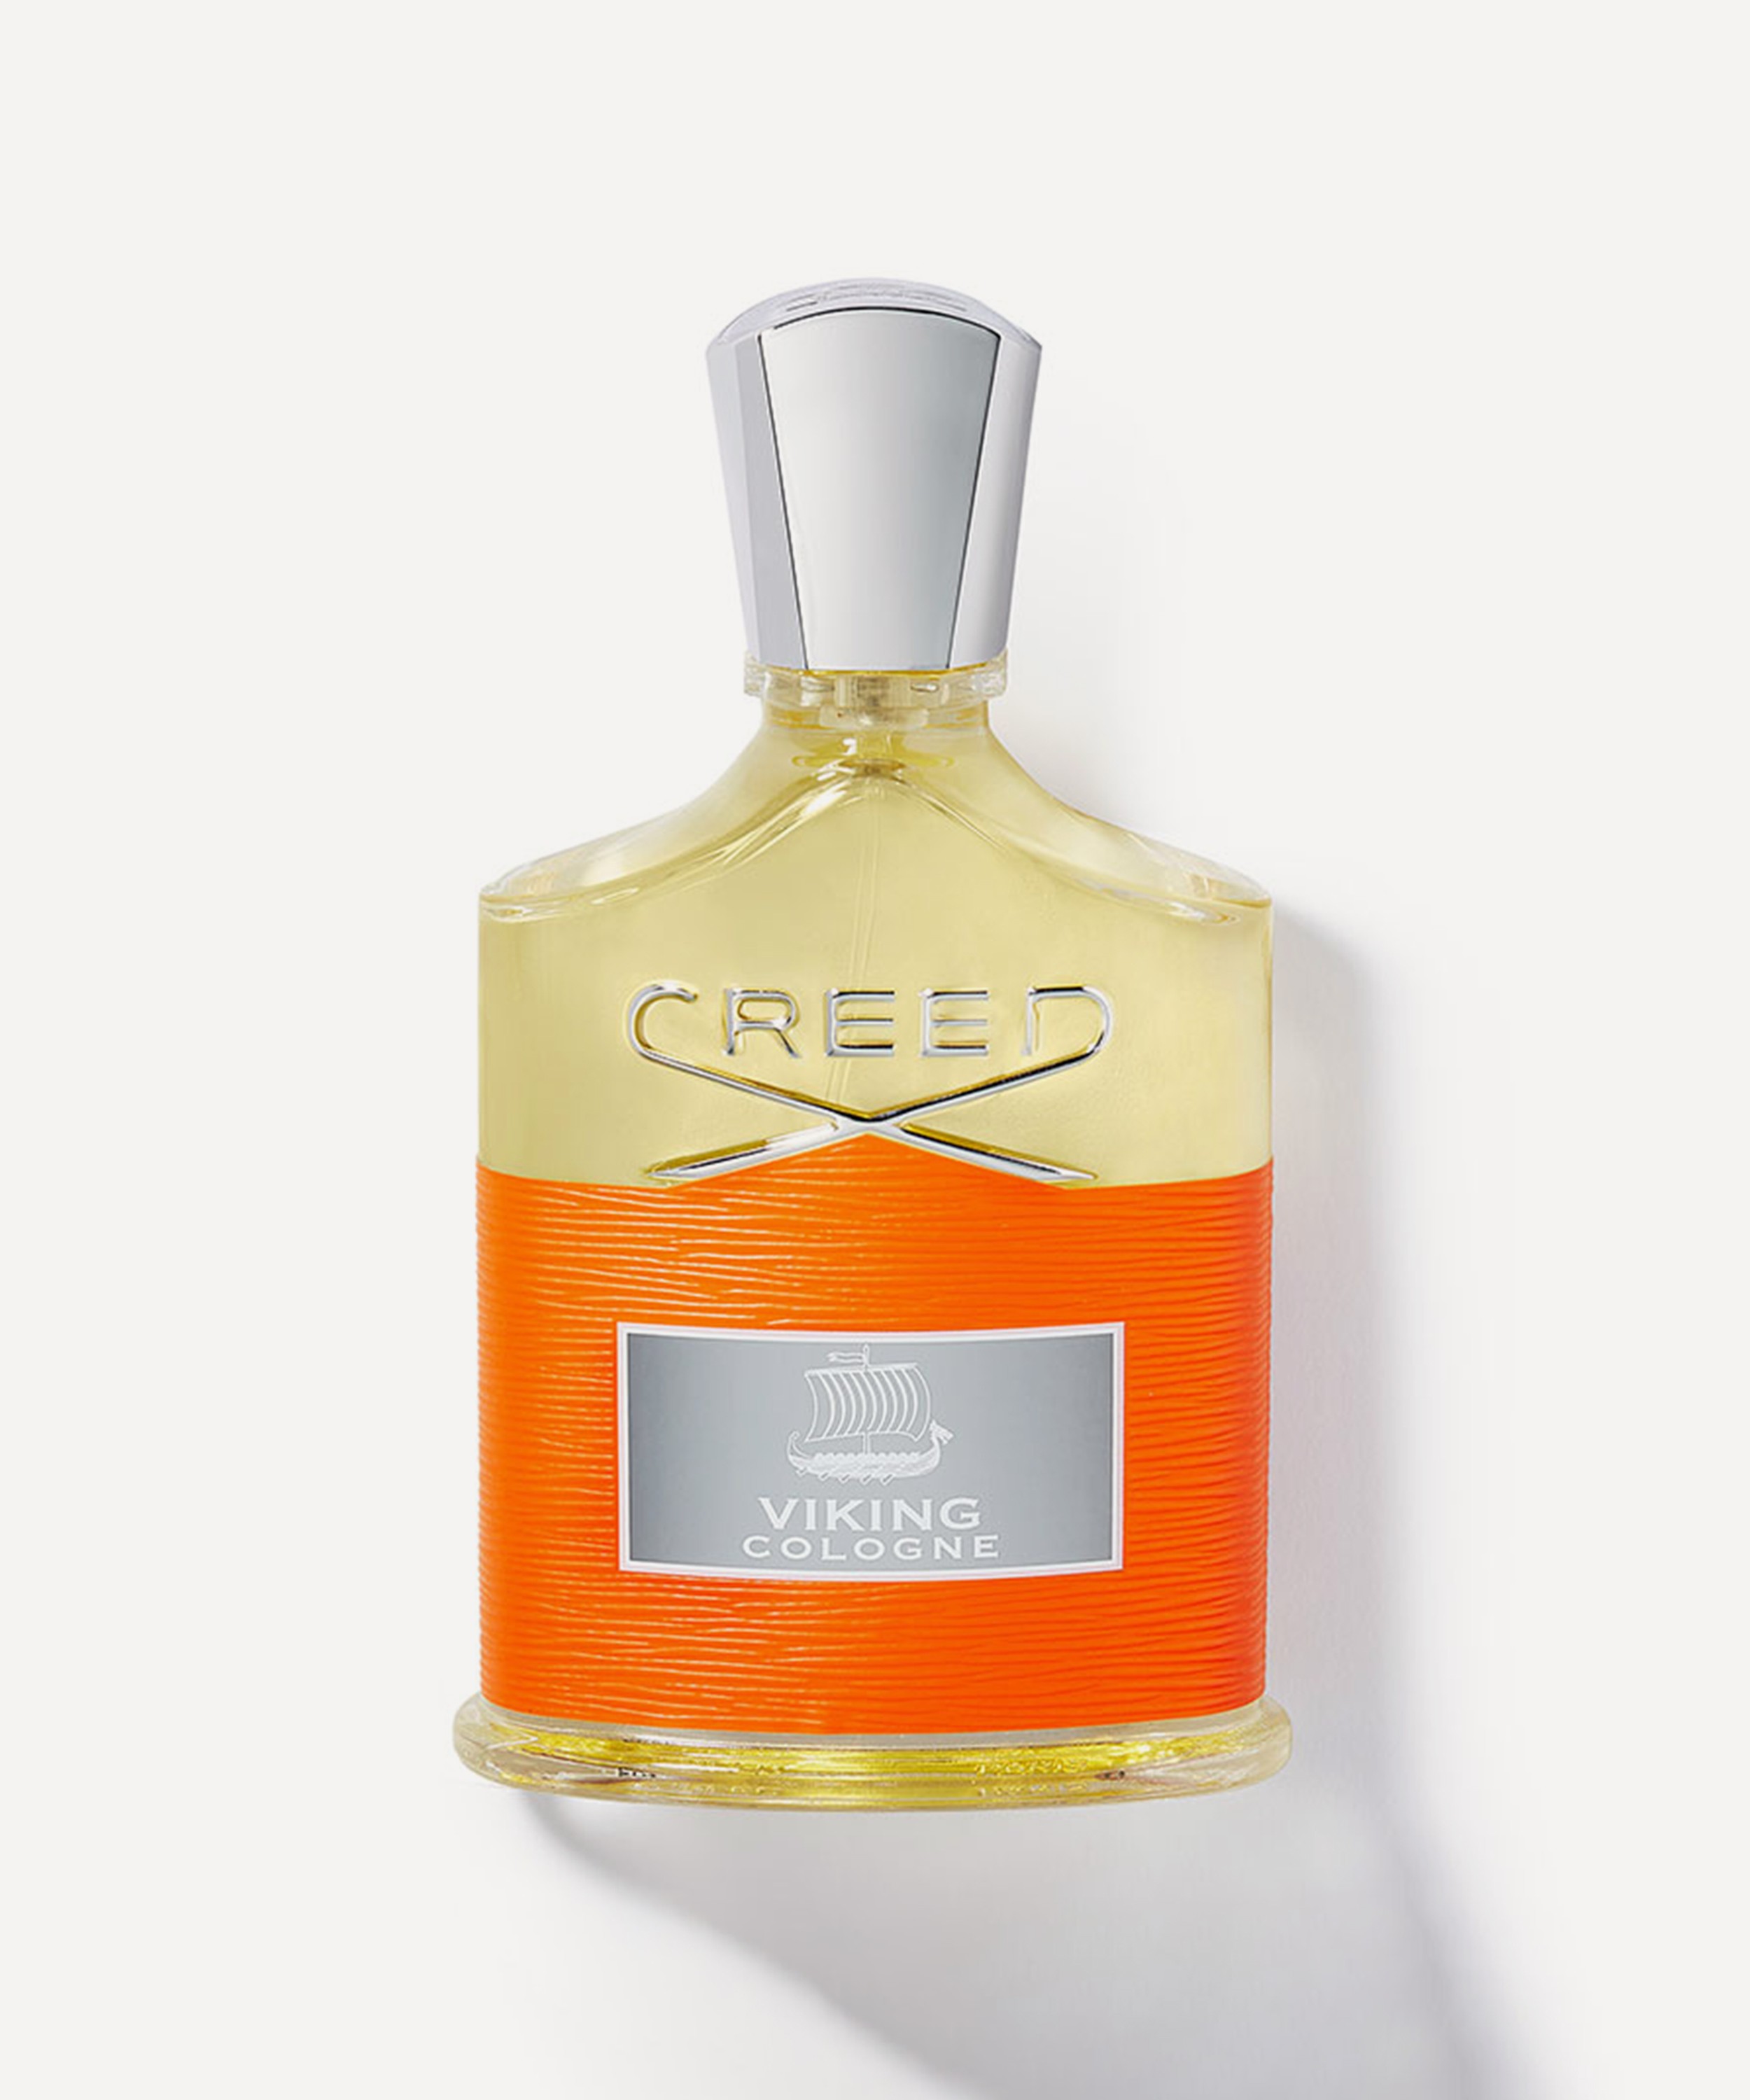 Creed - Viking Cologne 50ml image number 0